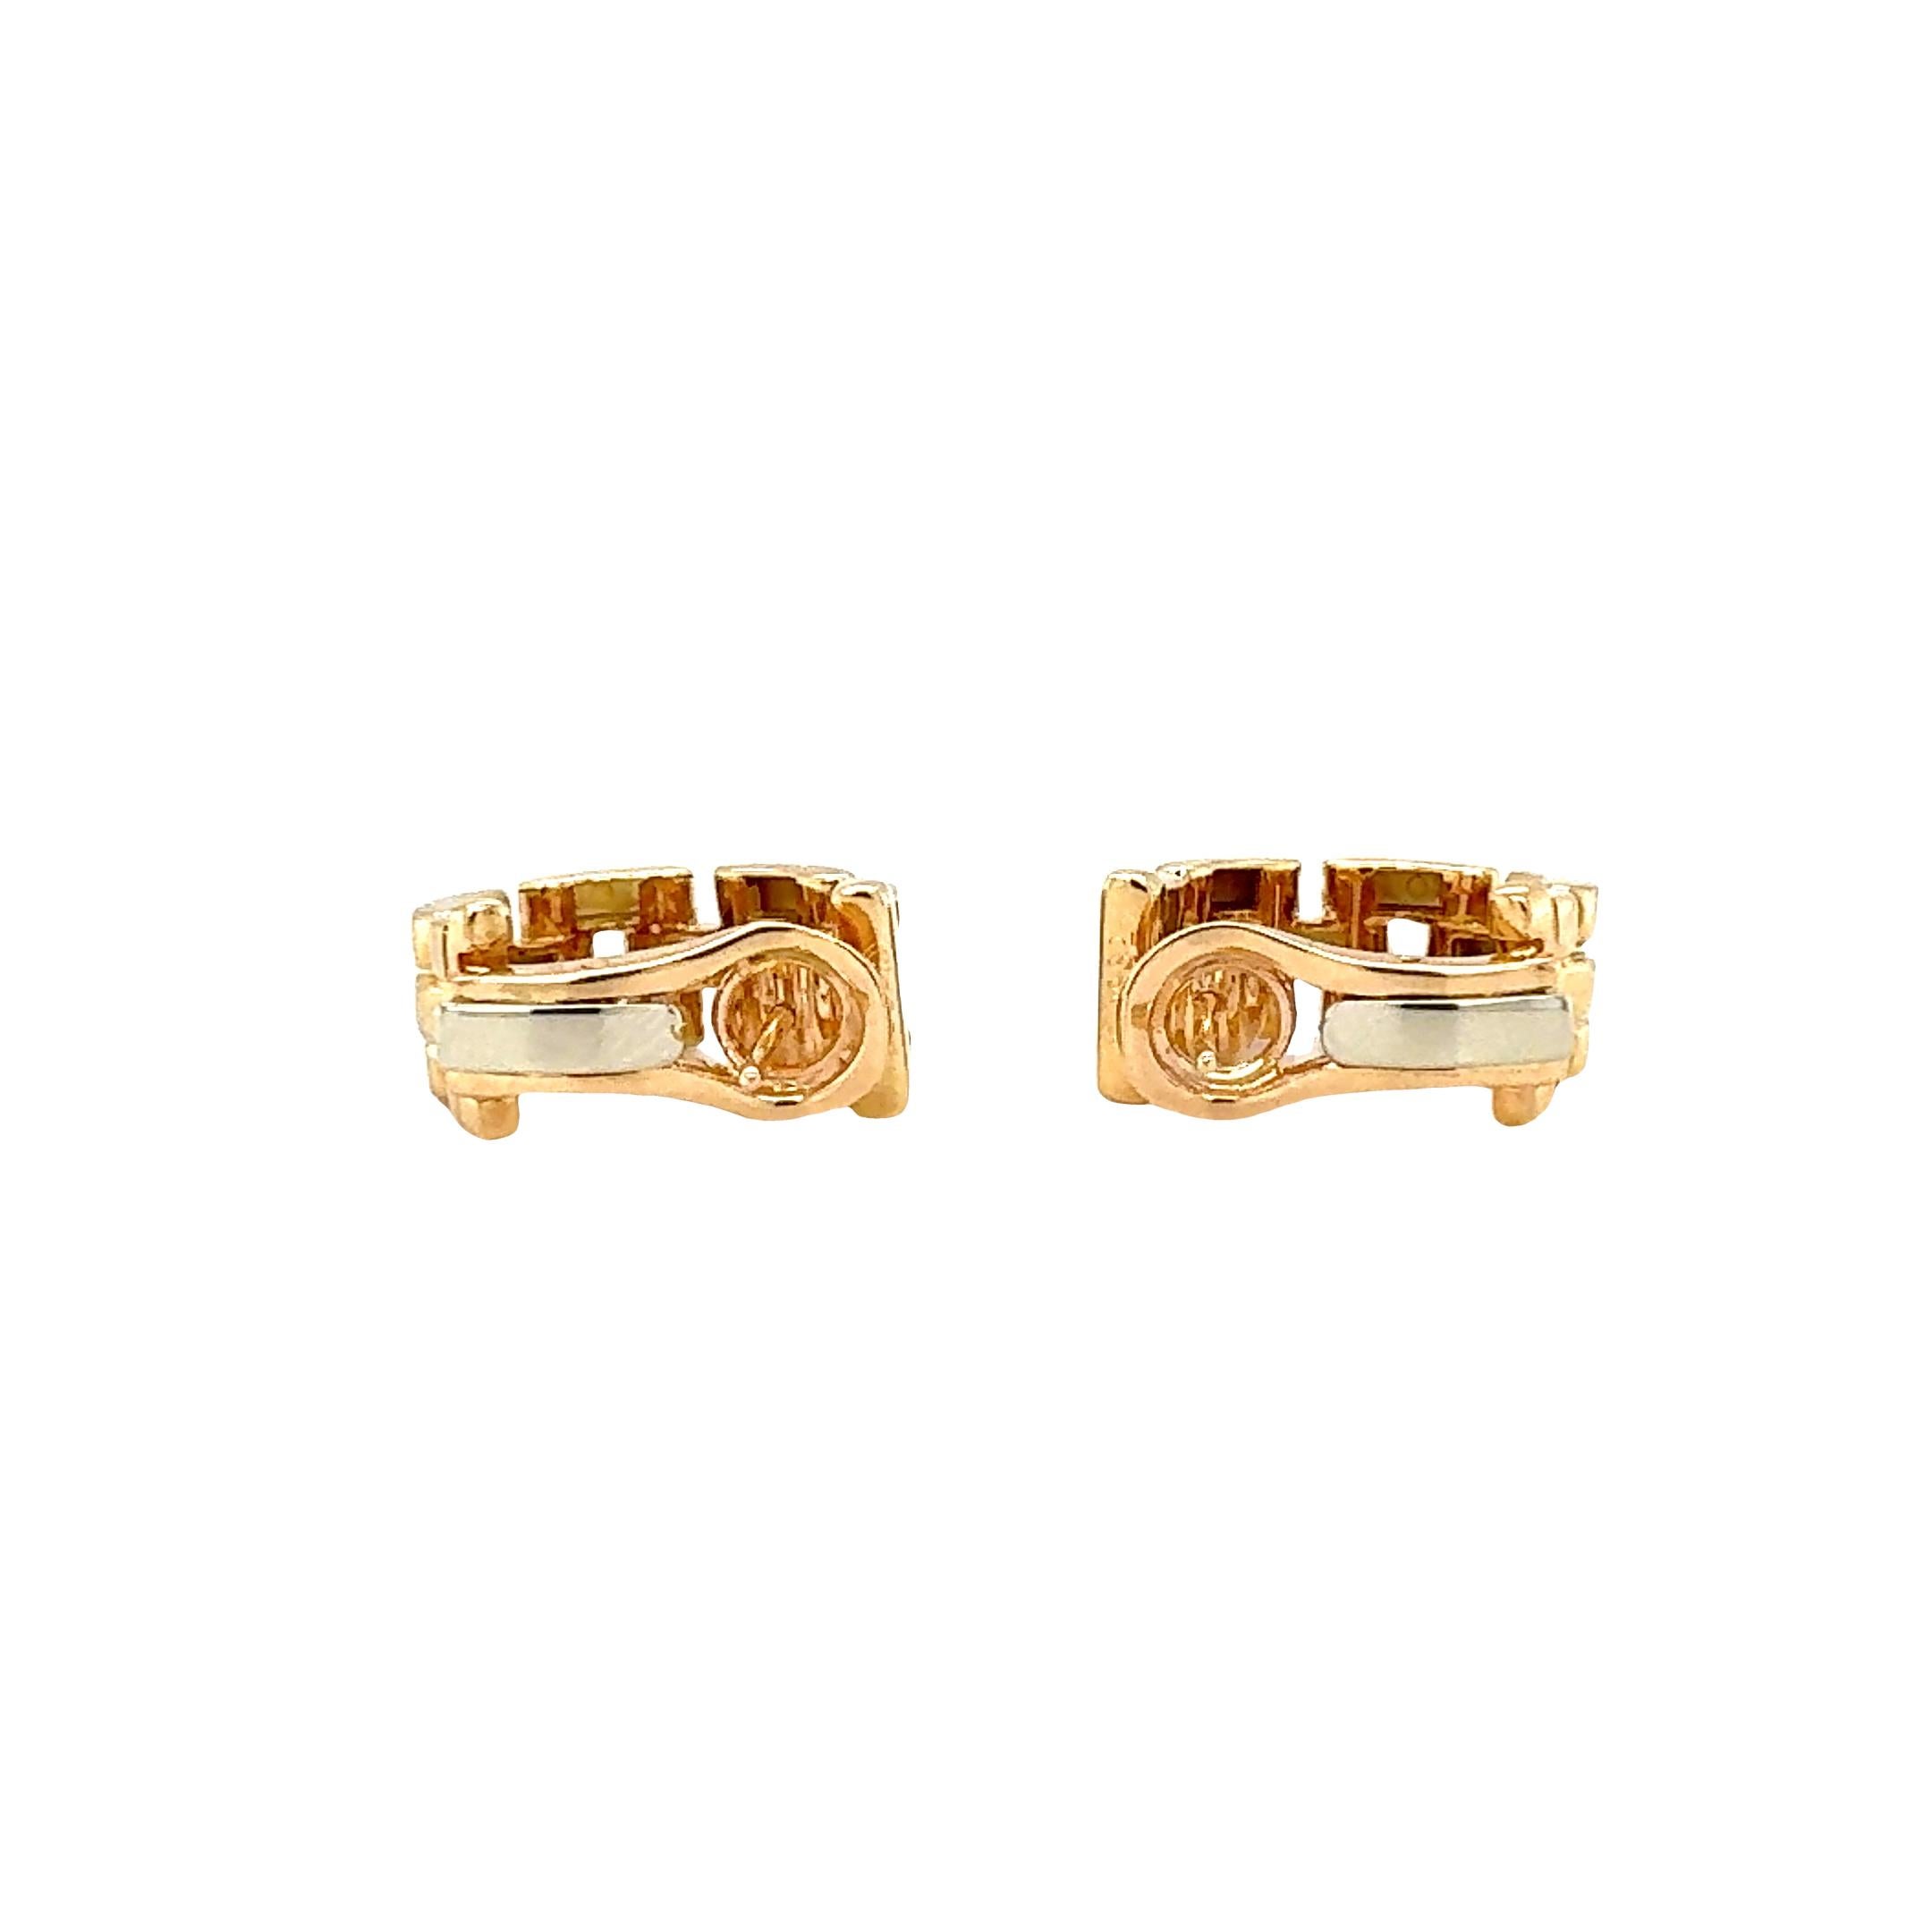 One pair of 18K yellow gold Maillon Panthere hoop earrings by Cartier featuring three rows of links with posts and backs. Accompanied by original Cartier box.

Metal: 18K Yellow Gold
Circa: 1992 
Stamp/Hallmark: G26844, Cartier,